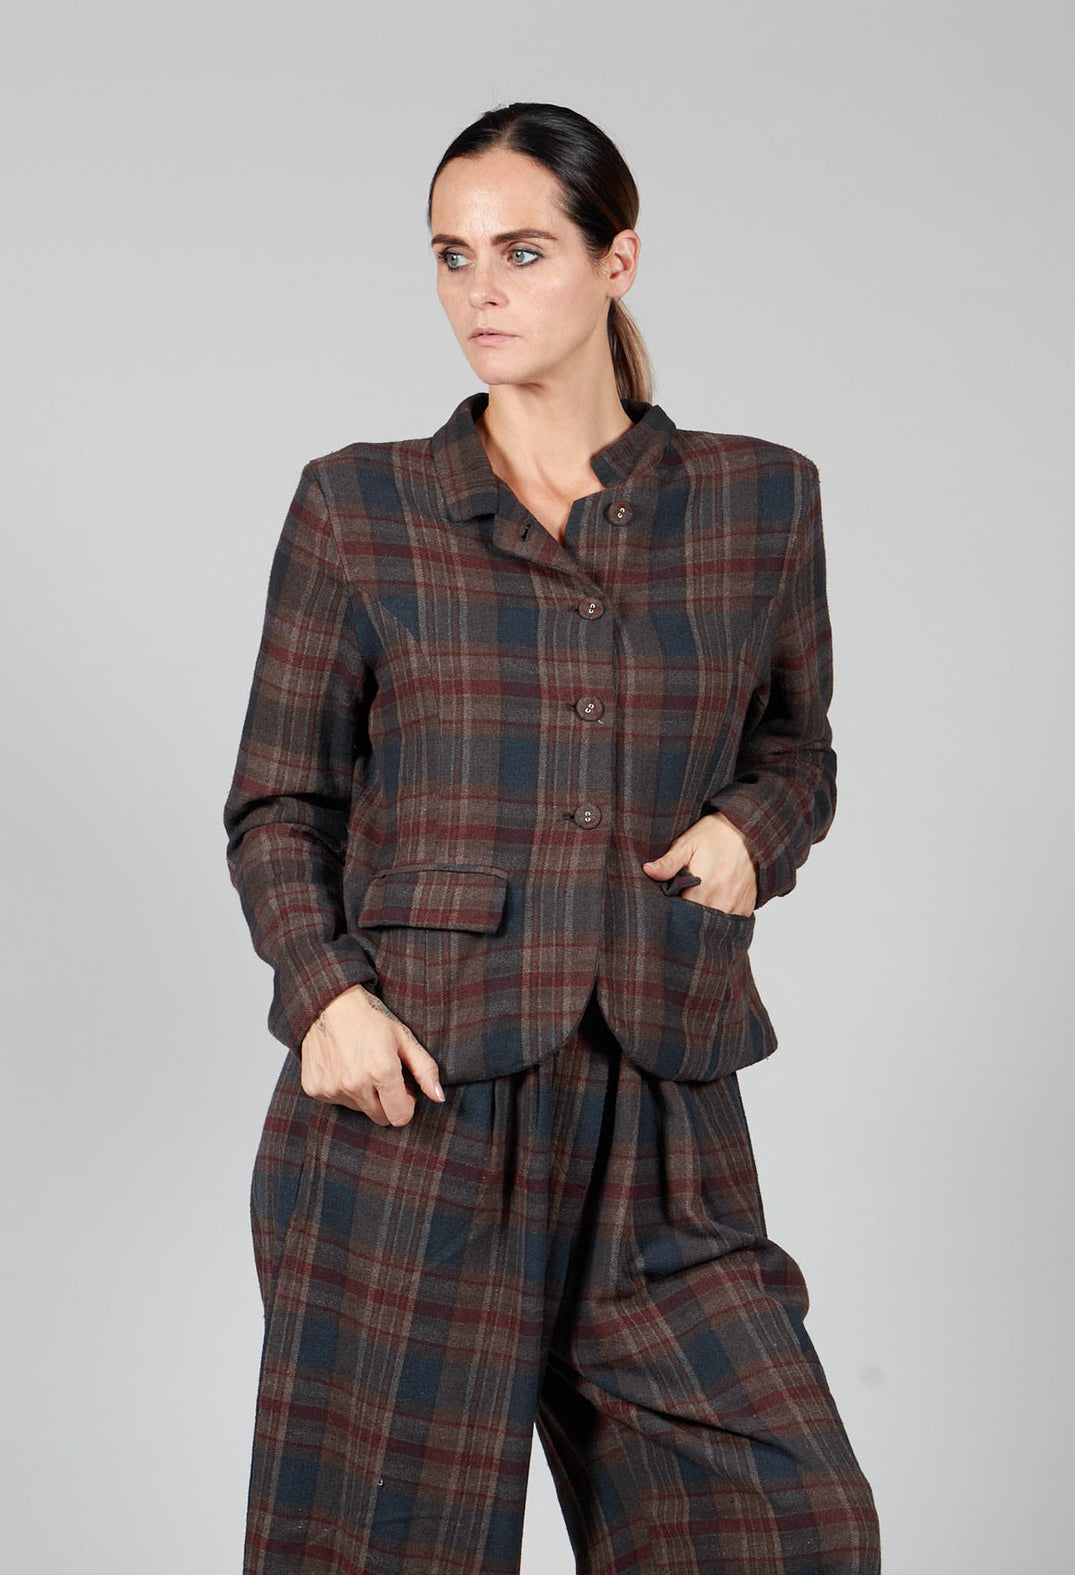 Cotton Plaid Cropped Jacket in Espresso